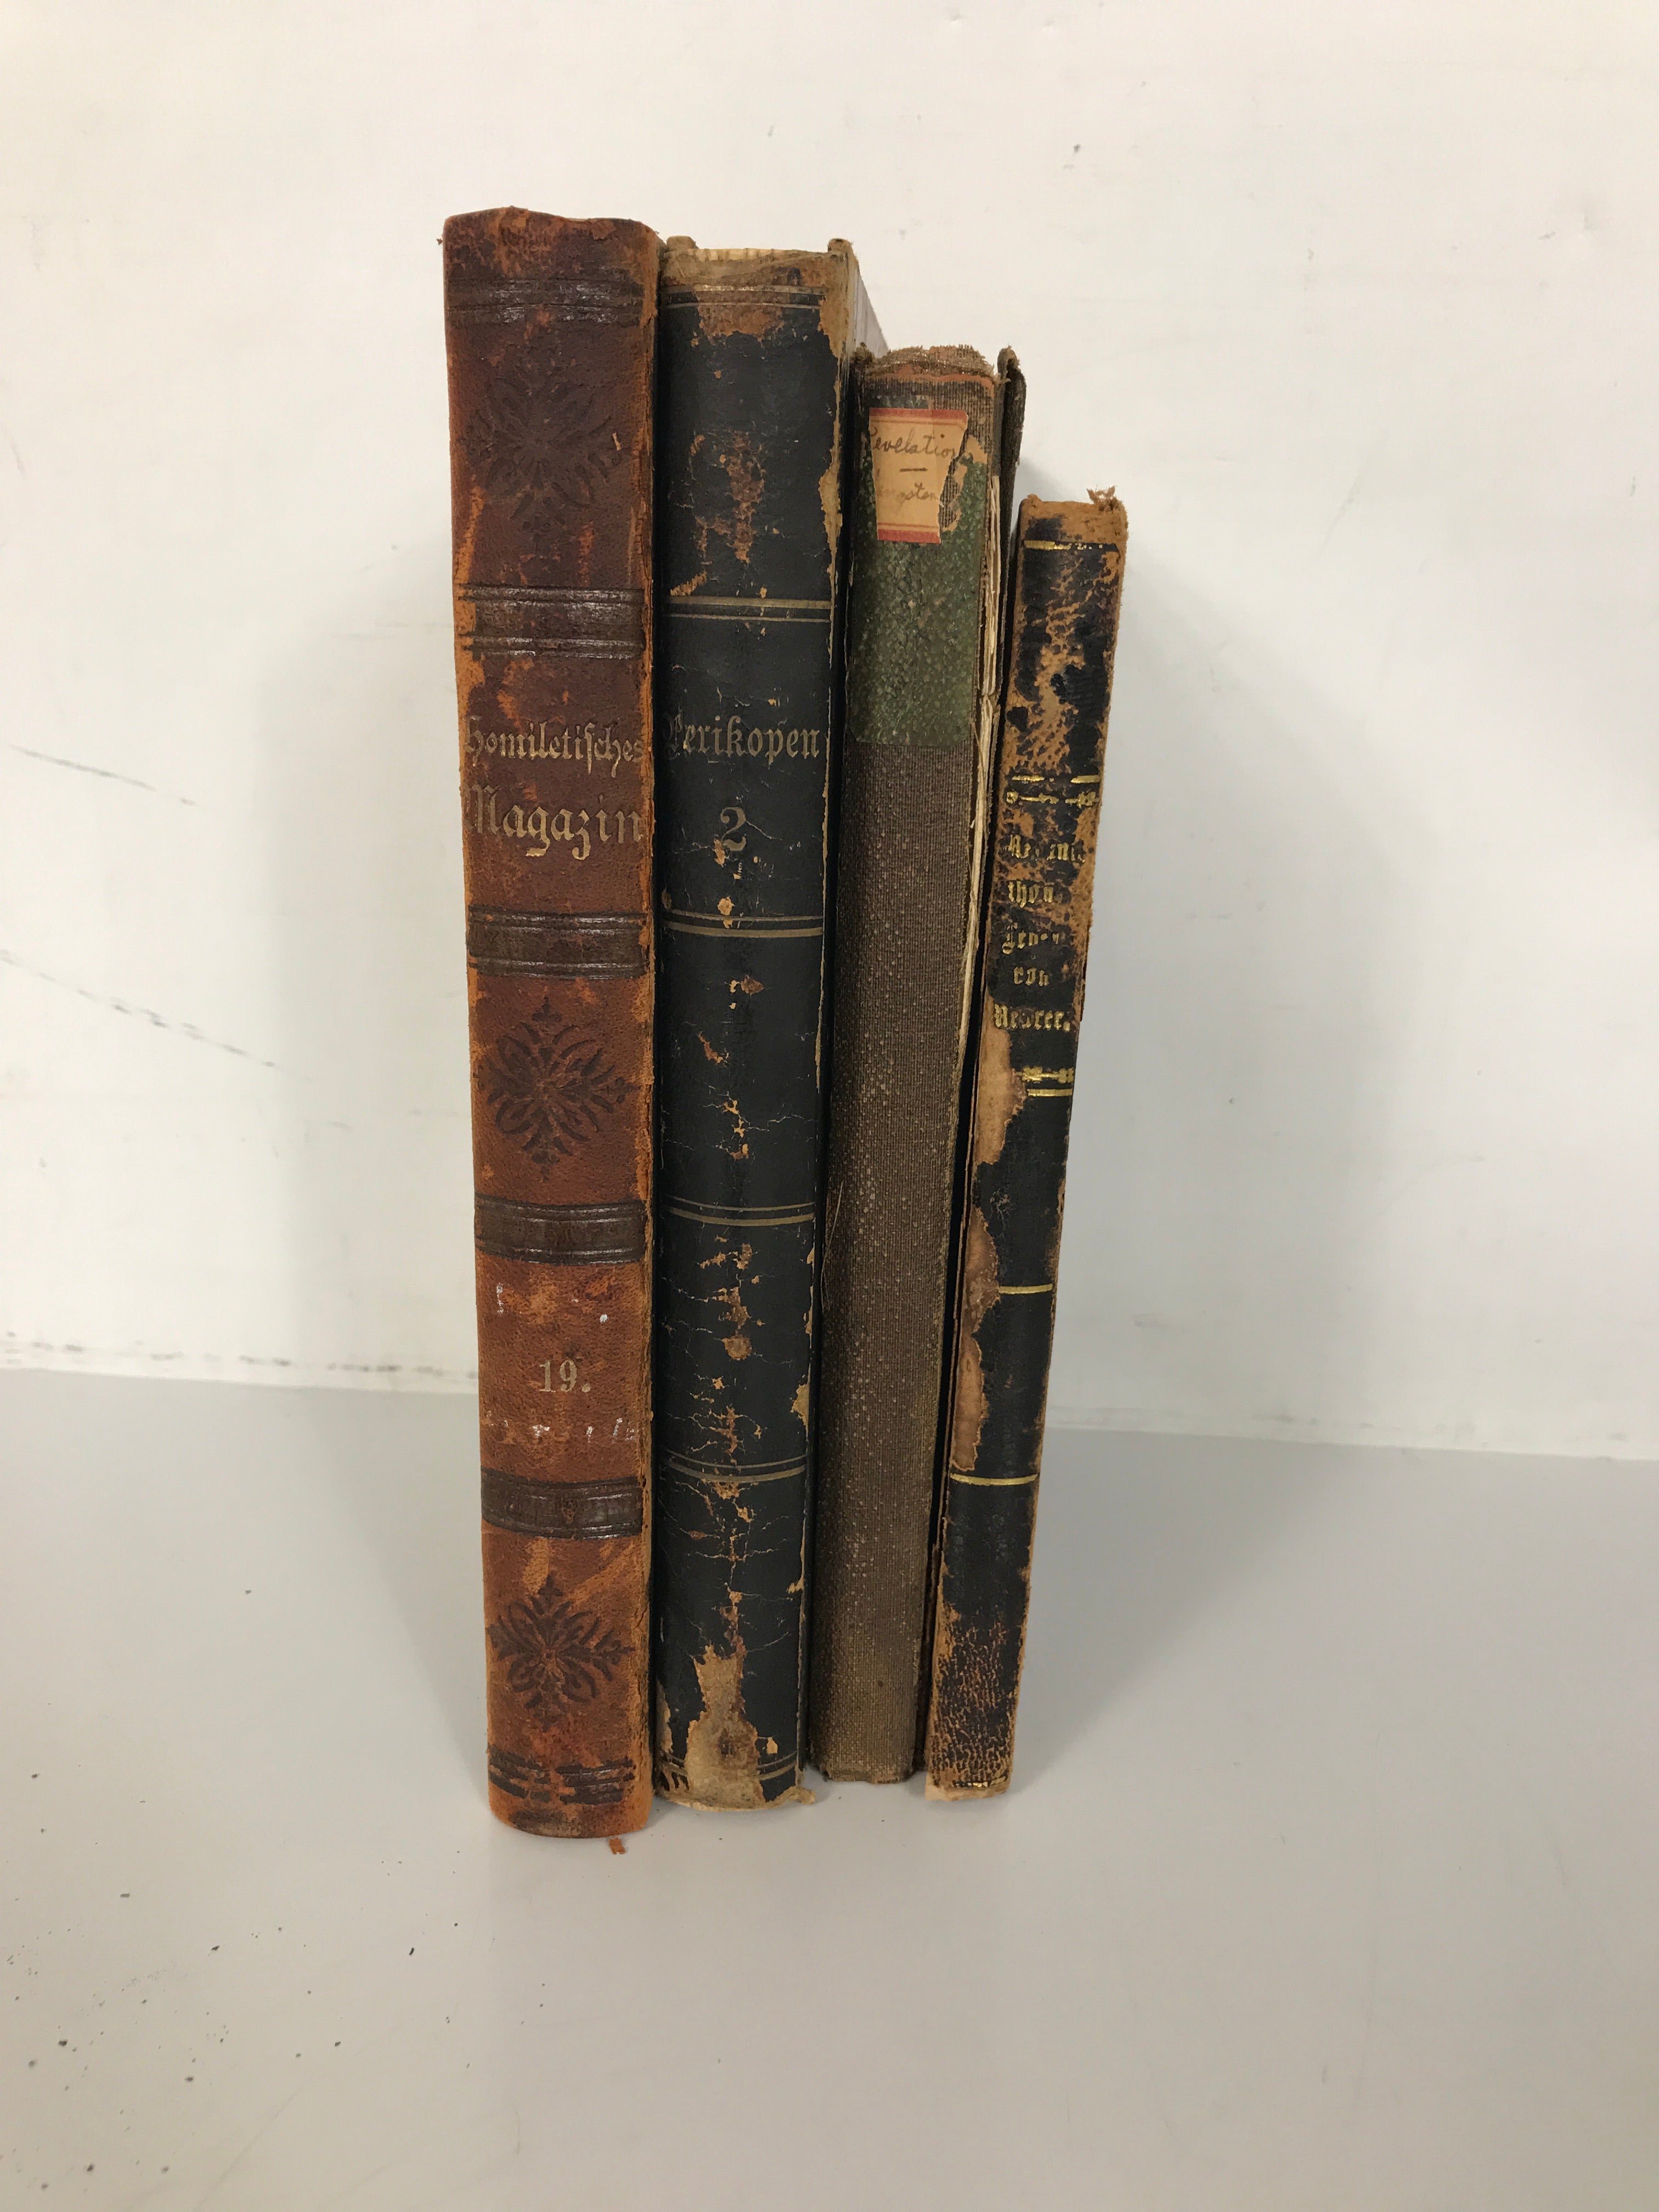 Lot of 4 German Lang Religious Vols 1851-1895 Marbled Boards See Photos for Info